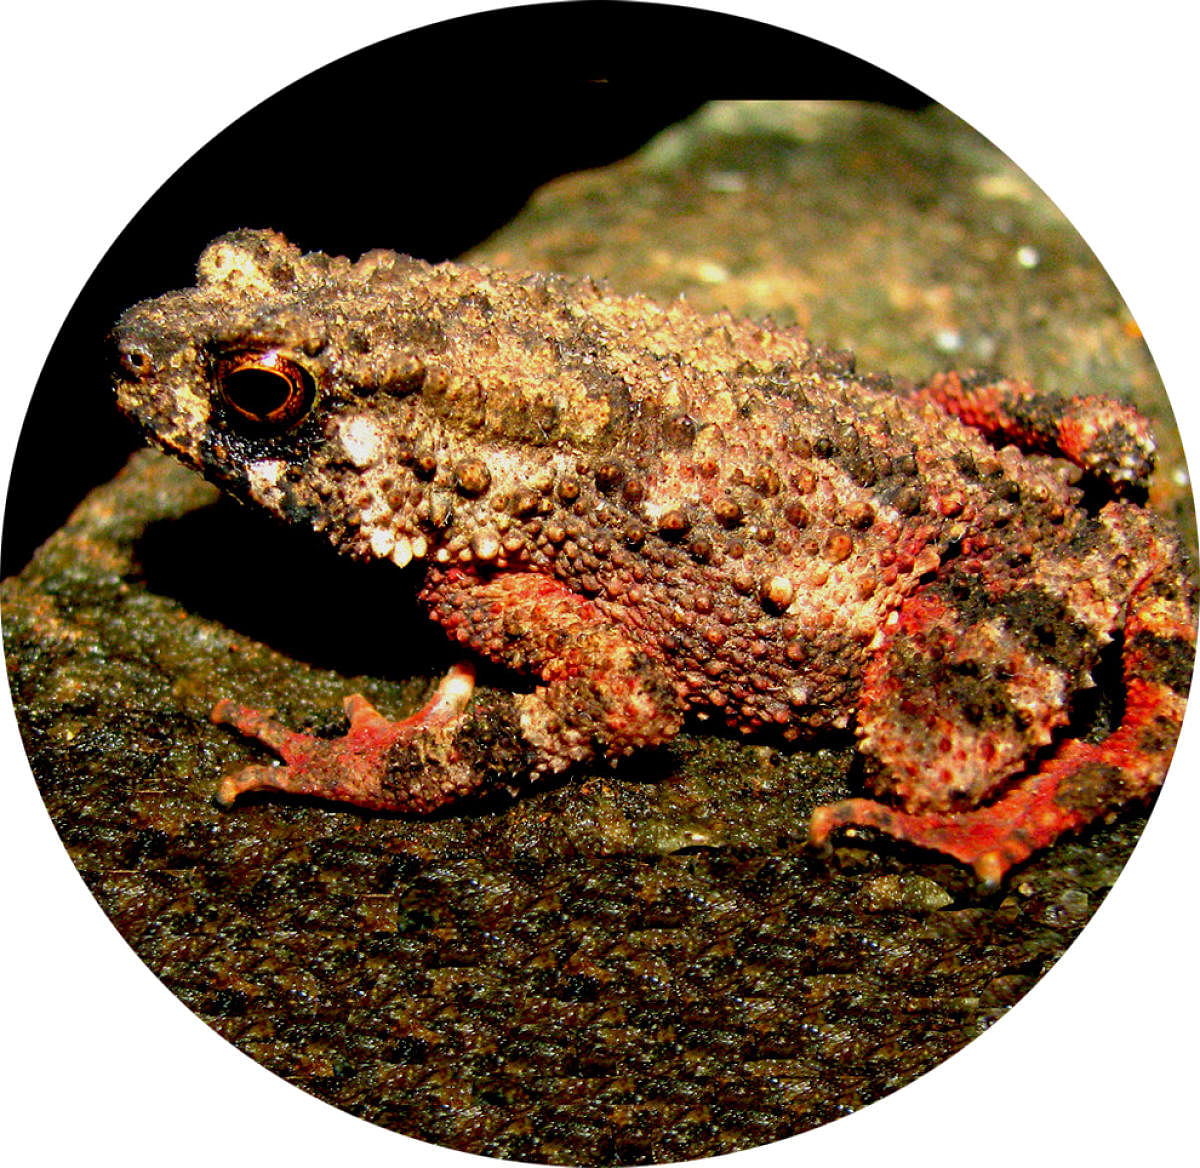 Beddome’s toad (Duttaphrynus beddomii)  Endemic to the Western Ghats, these endangered frogs can be found on the leaf litter on the forest floor, under logs, rock crevices and on the sides of the stream.